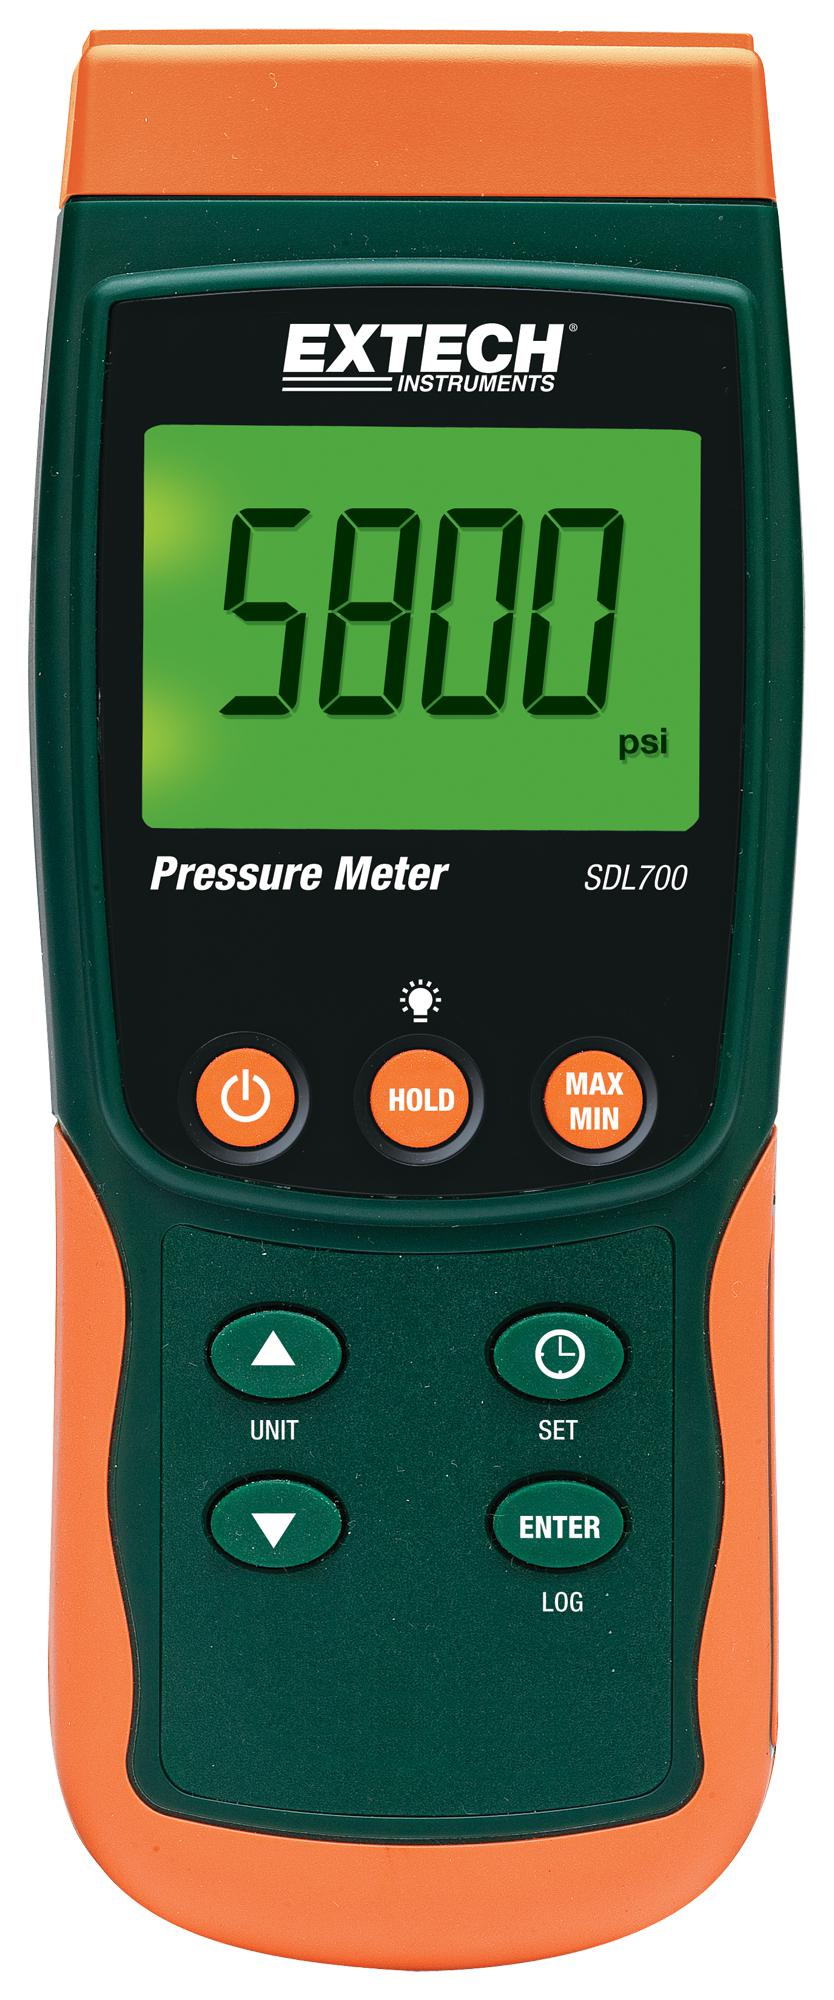 SDL700 PRESSURE METER/DATALOGGER, 0.2 TO 290PSI EXTECH INSTRUMENTS